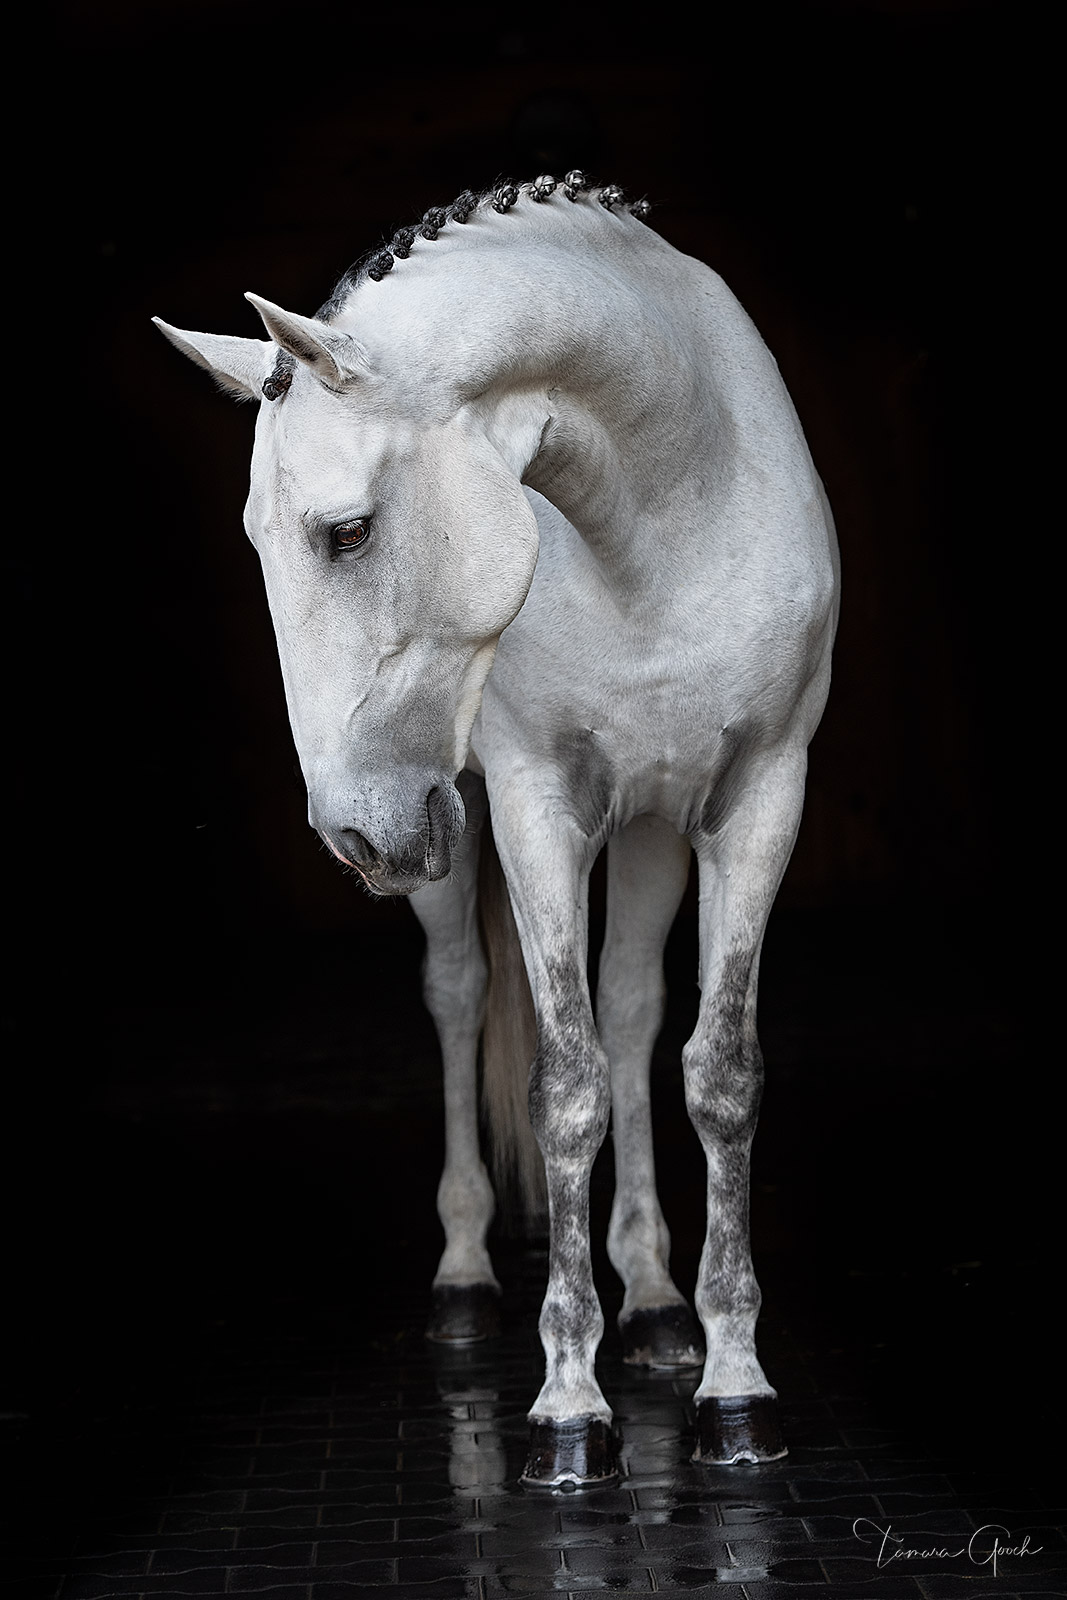 Luxury gallery quality black and white horse, equestrian and equine fine art photo prints for sale.